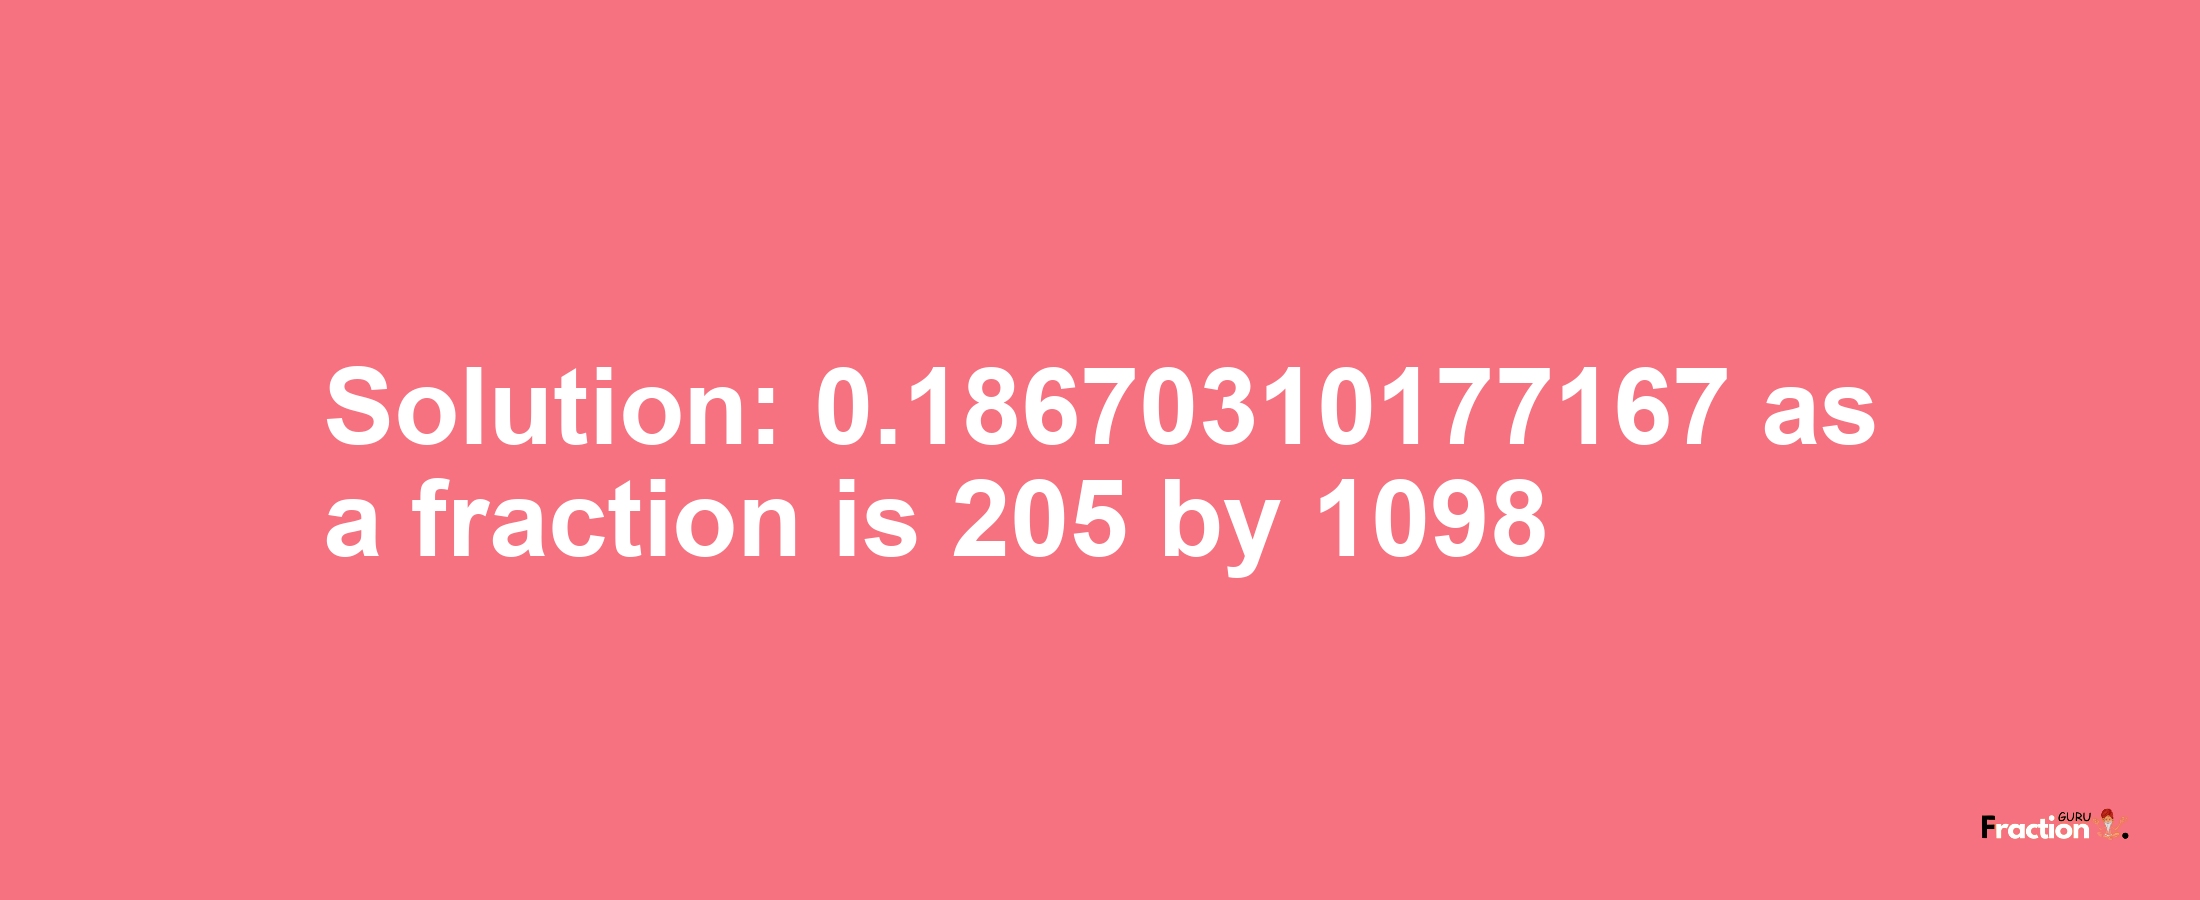 Solution:0.18670310177167 as a fraction is 205/1098